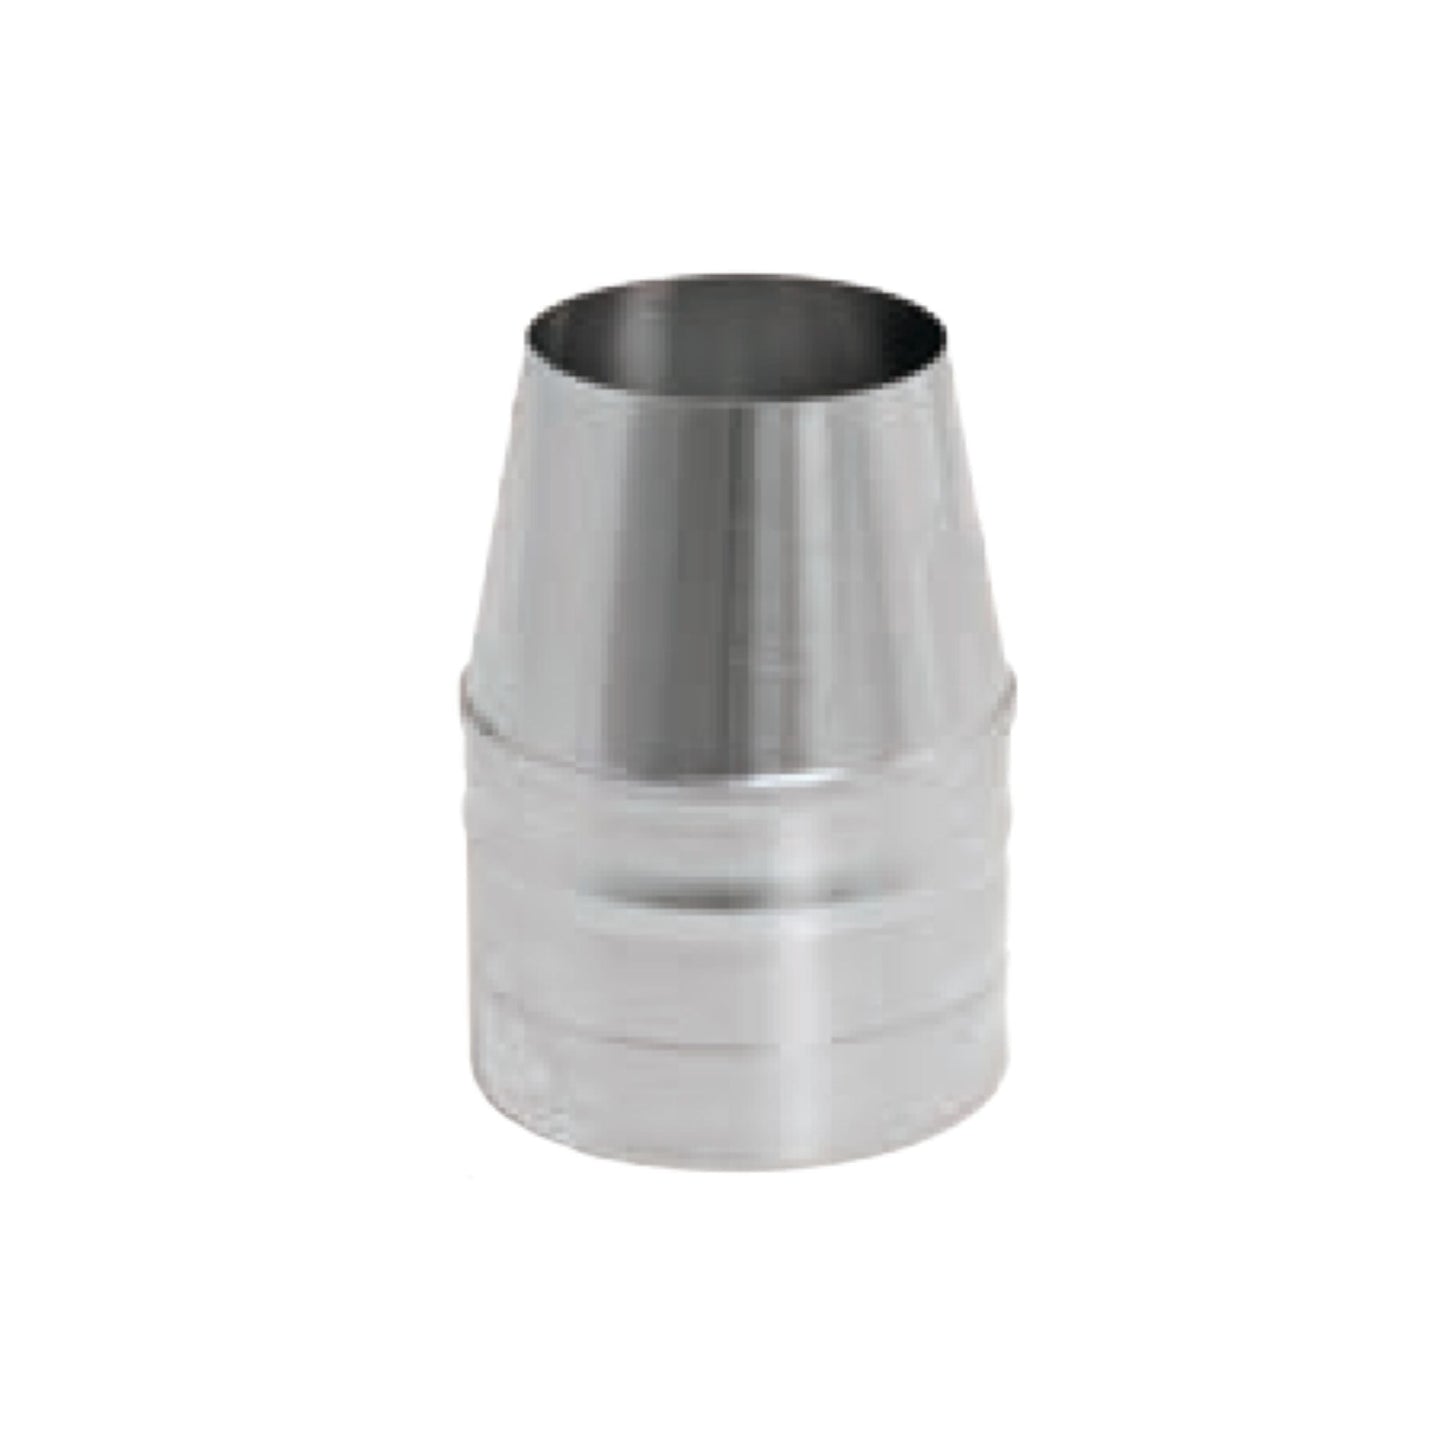 DuraVent FasNSeal 8" x 5" 29-4C Stainless Steel Termination Cone